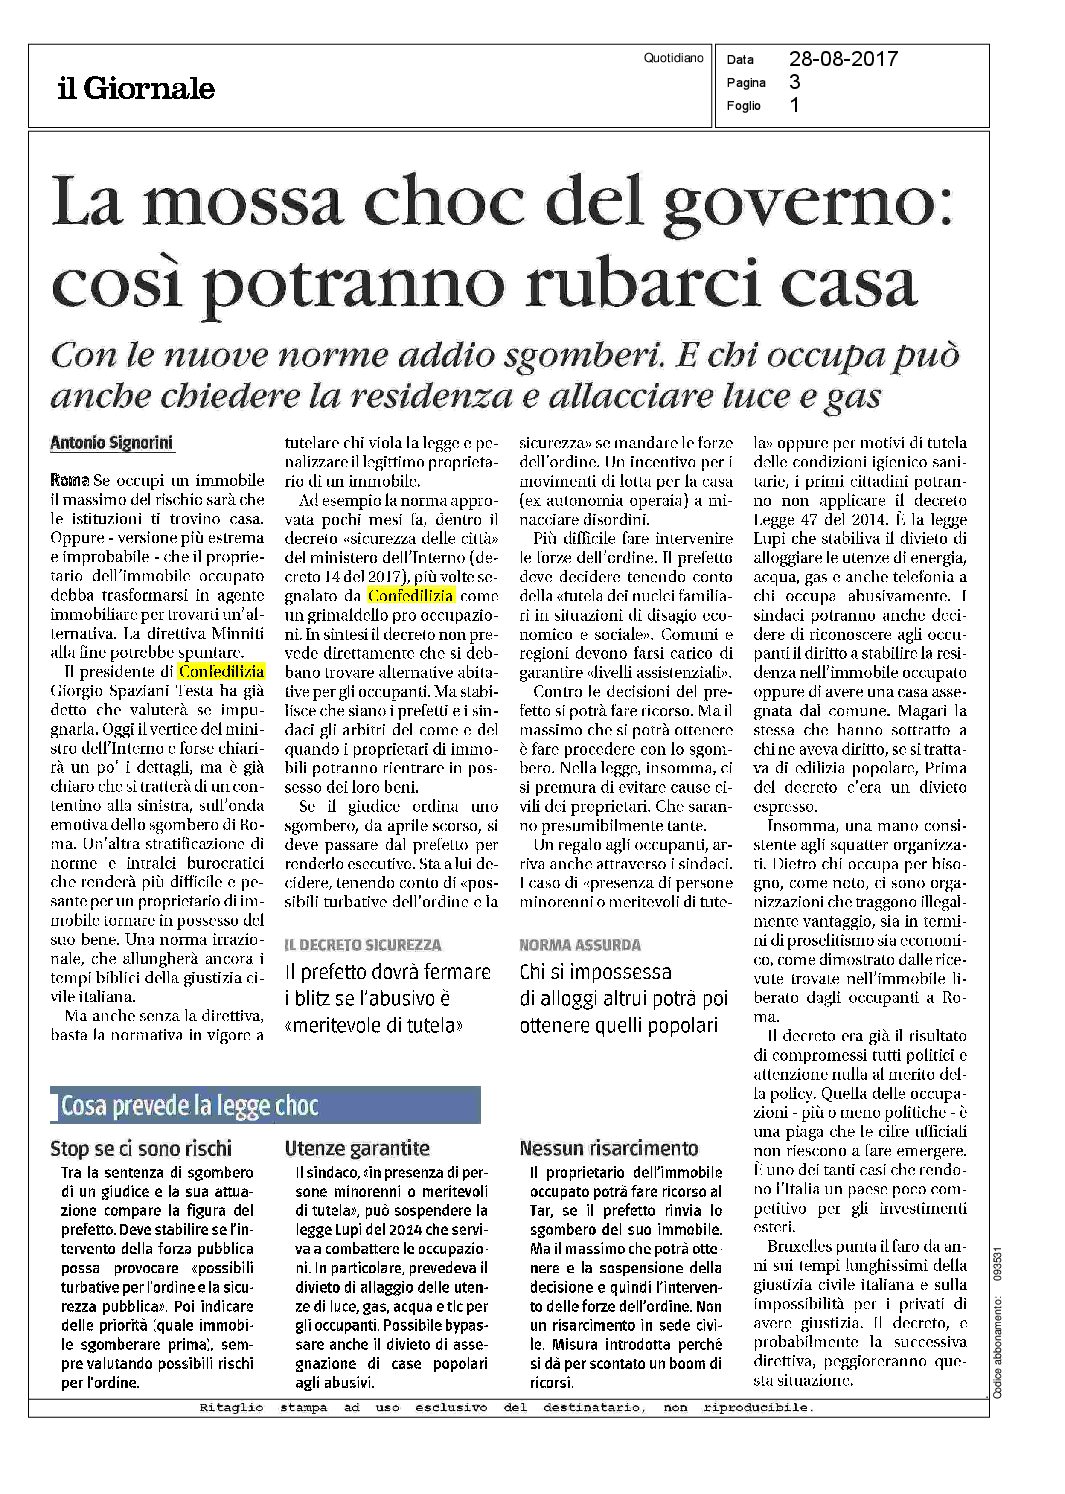 Giornale_28.8.17